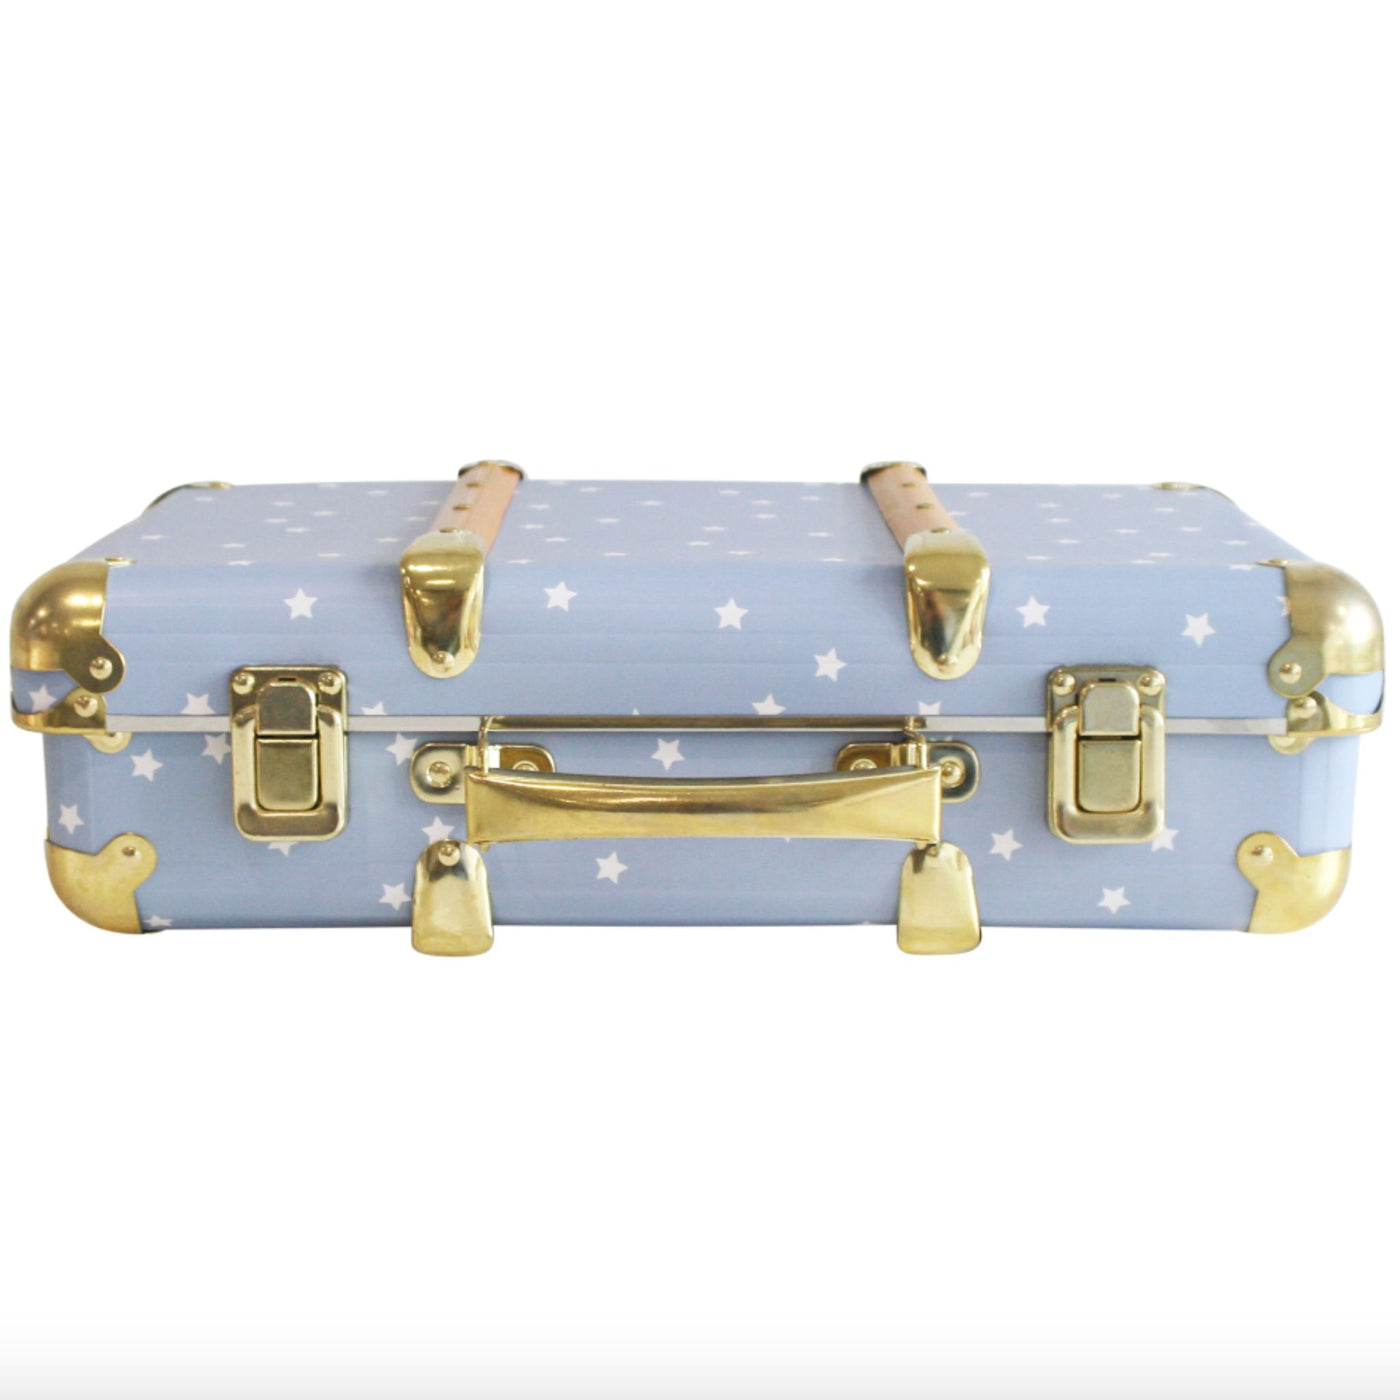 Alimrose Vintage Style Carry Case in Blue Stars